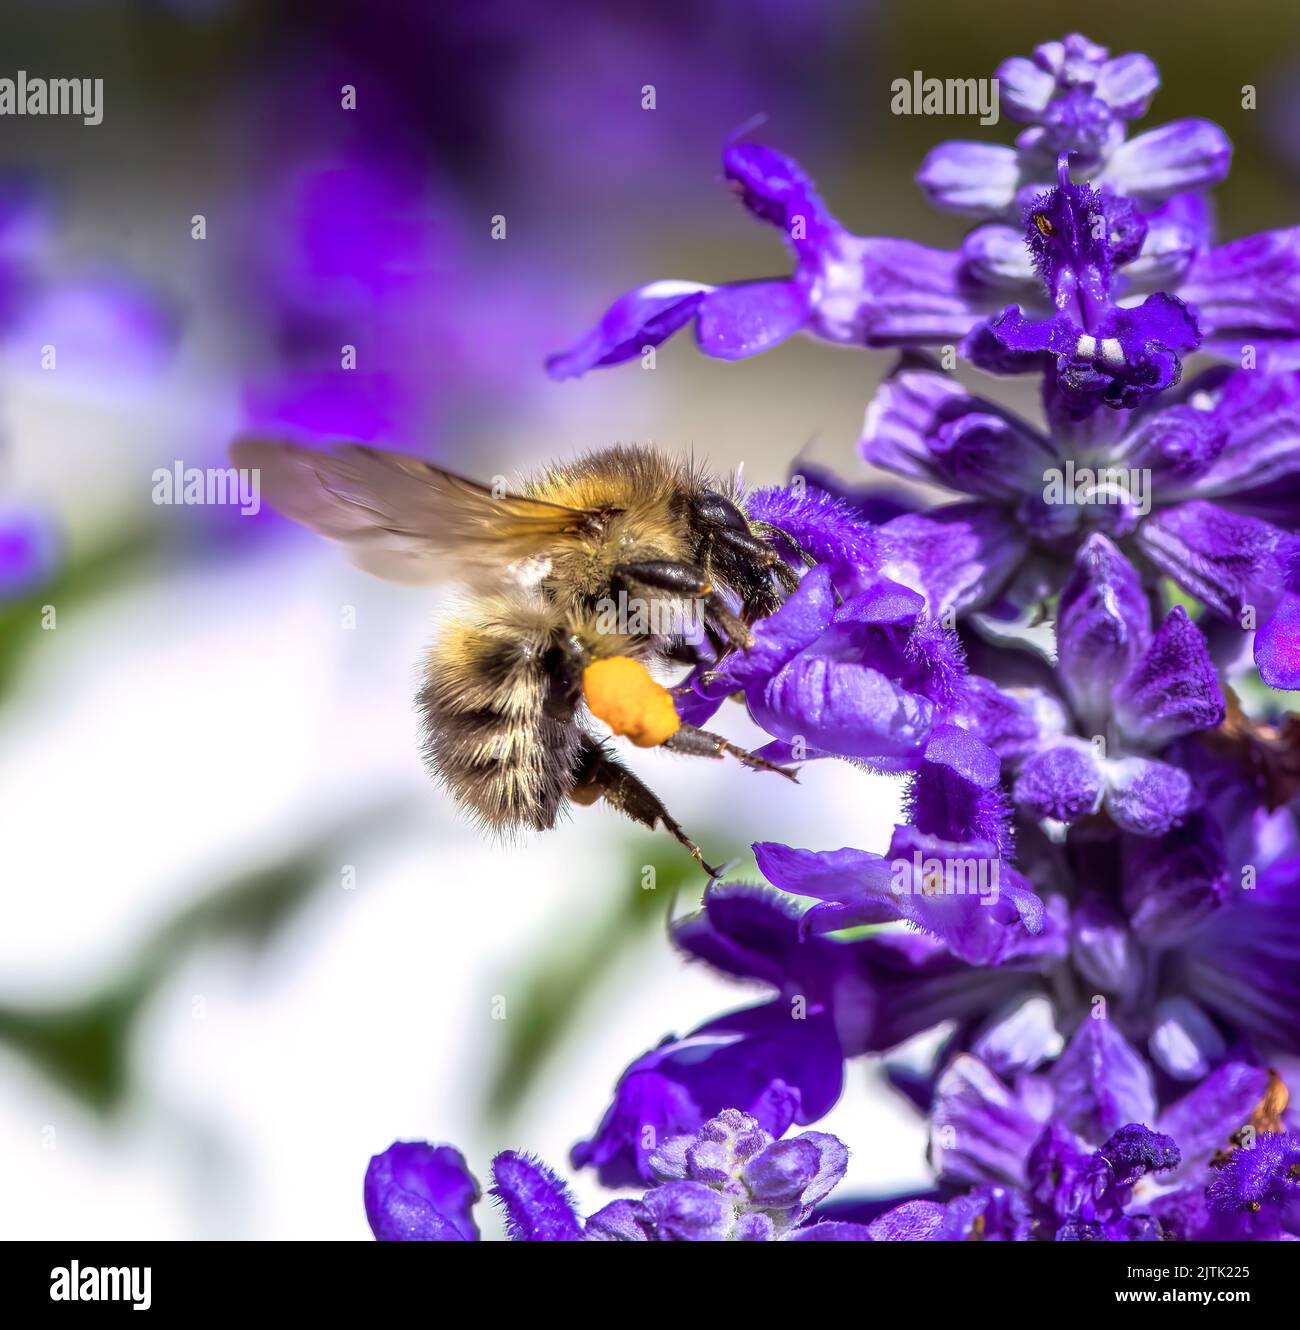 Macro of a common carder bee on a purple sage flower blossom Stock Photo